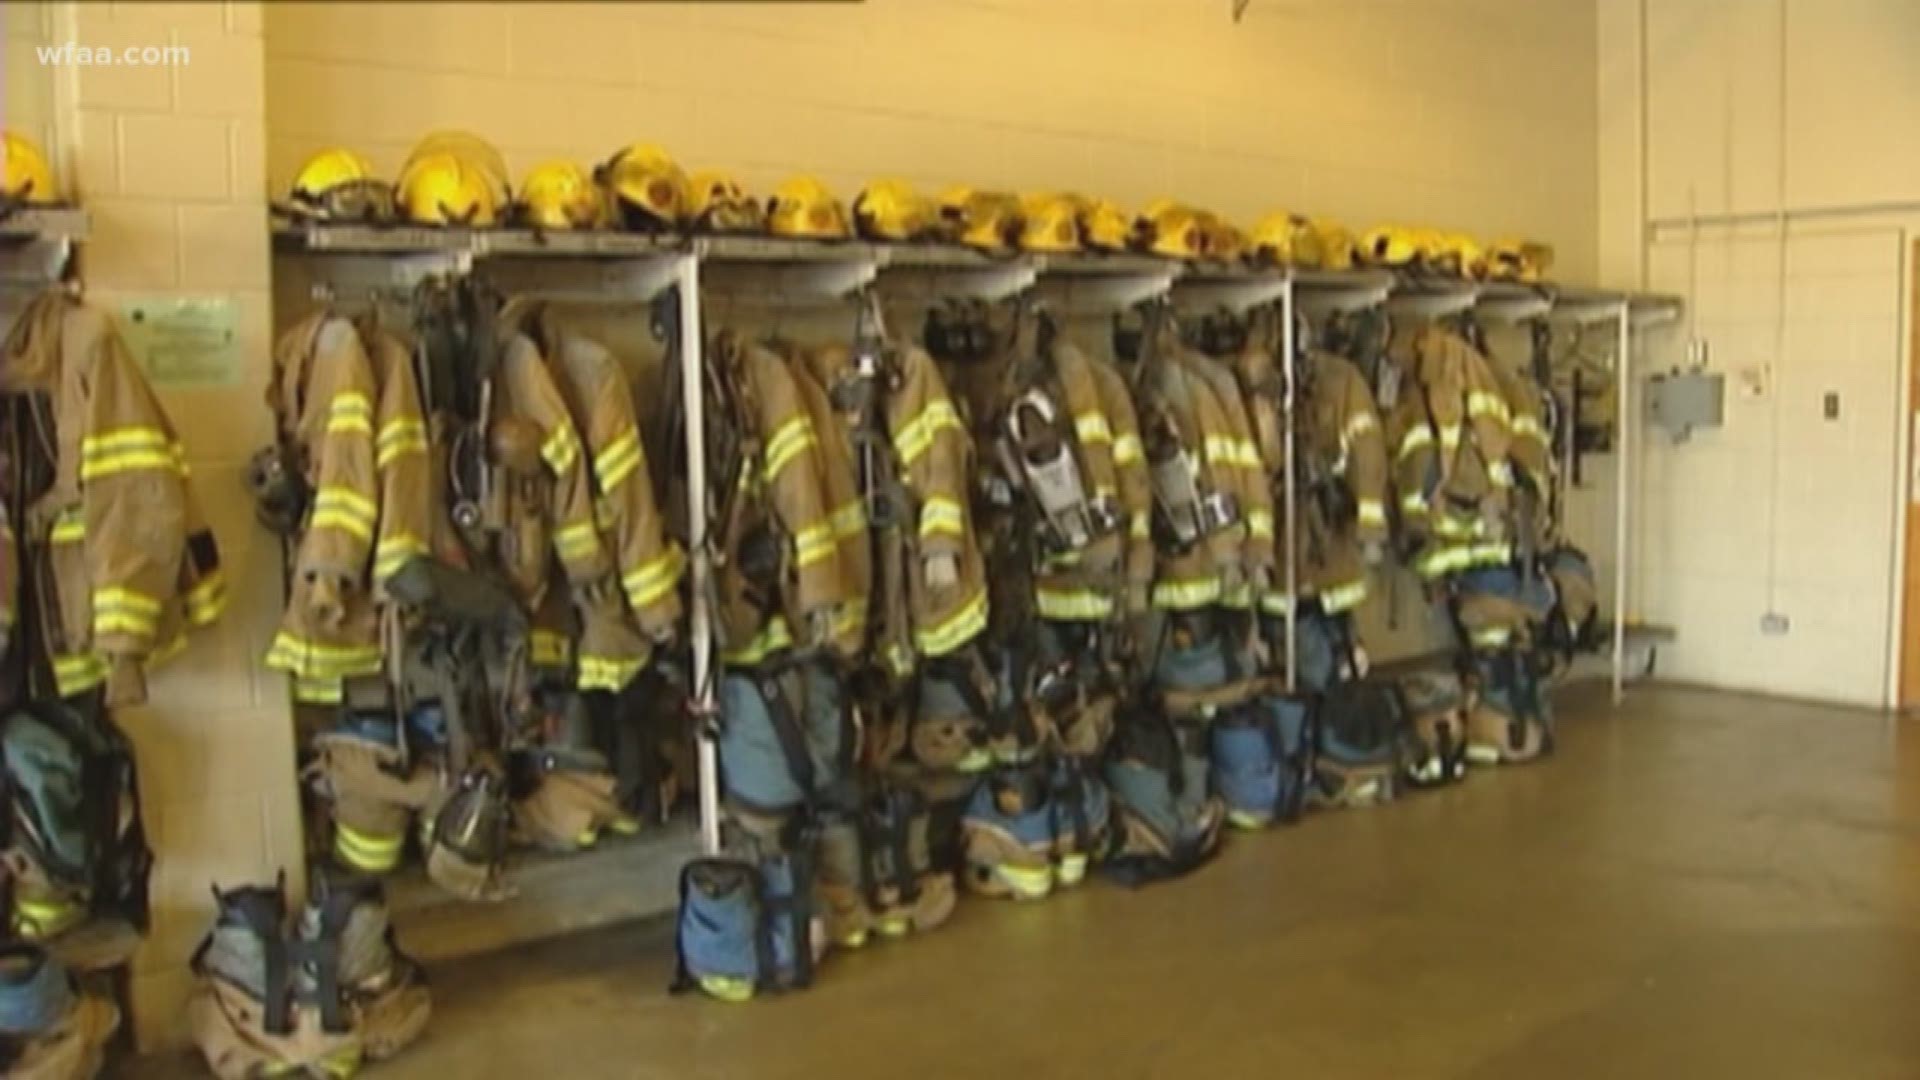 Dallas firefighters gear-cleaning service suspended until further ...